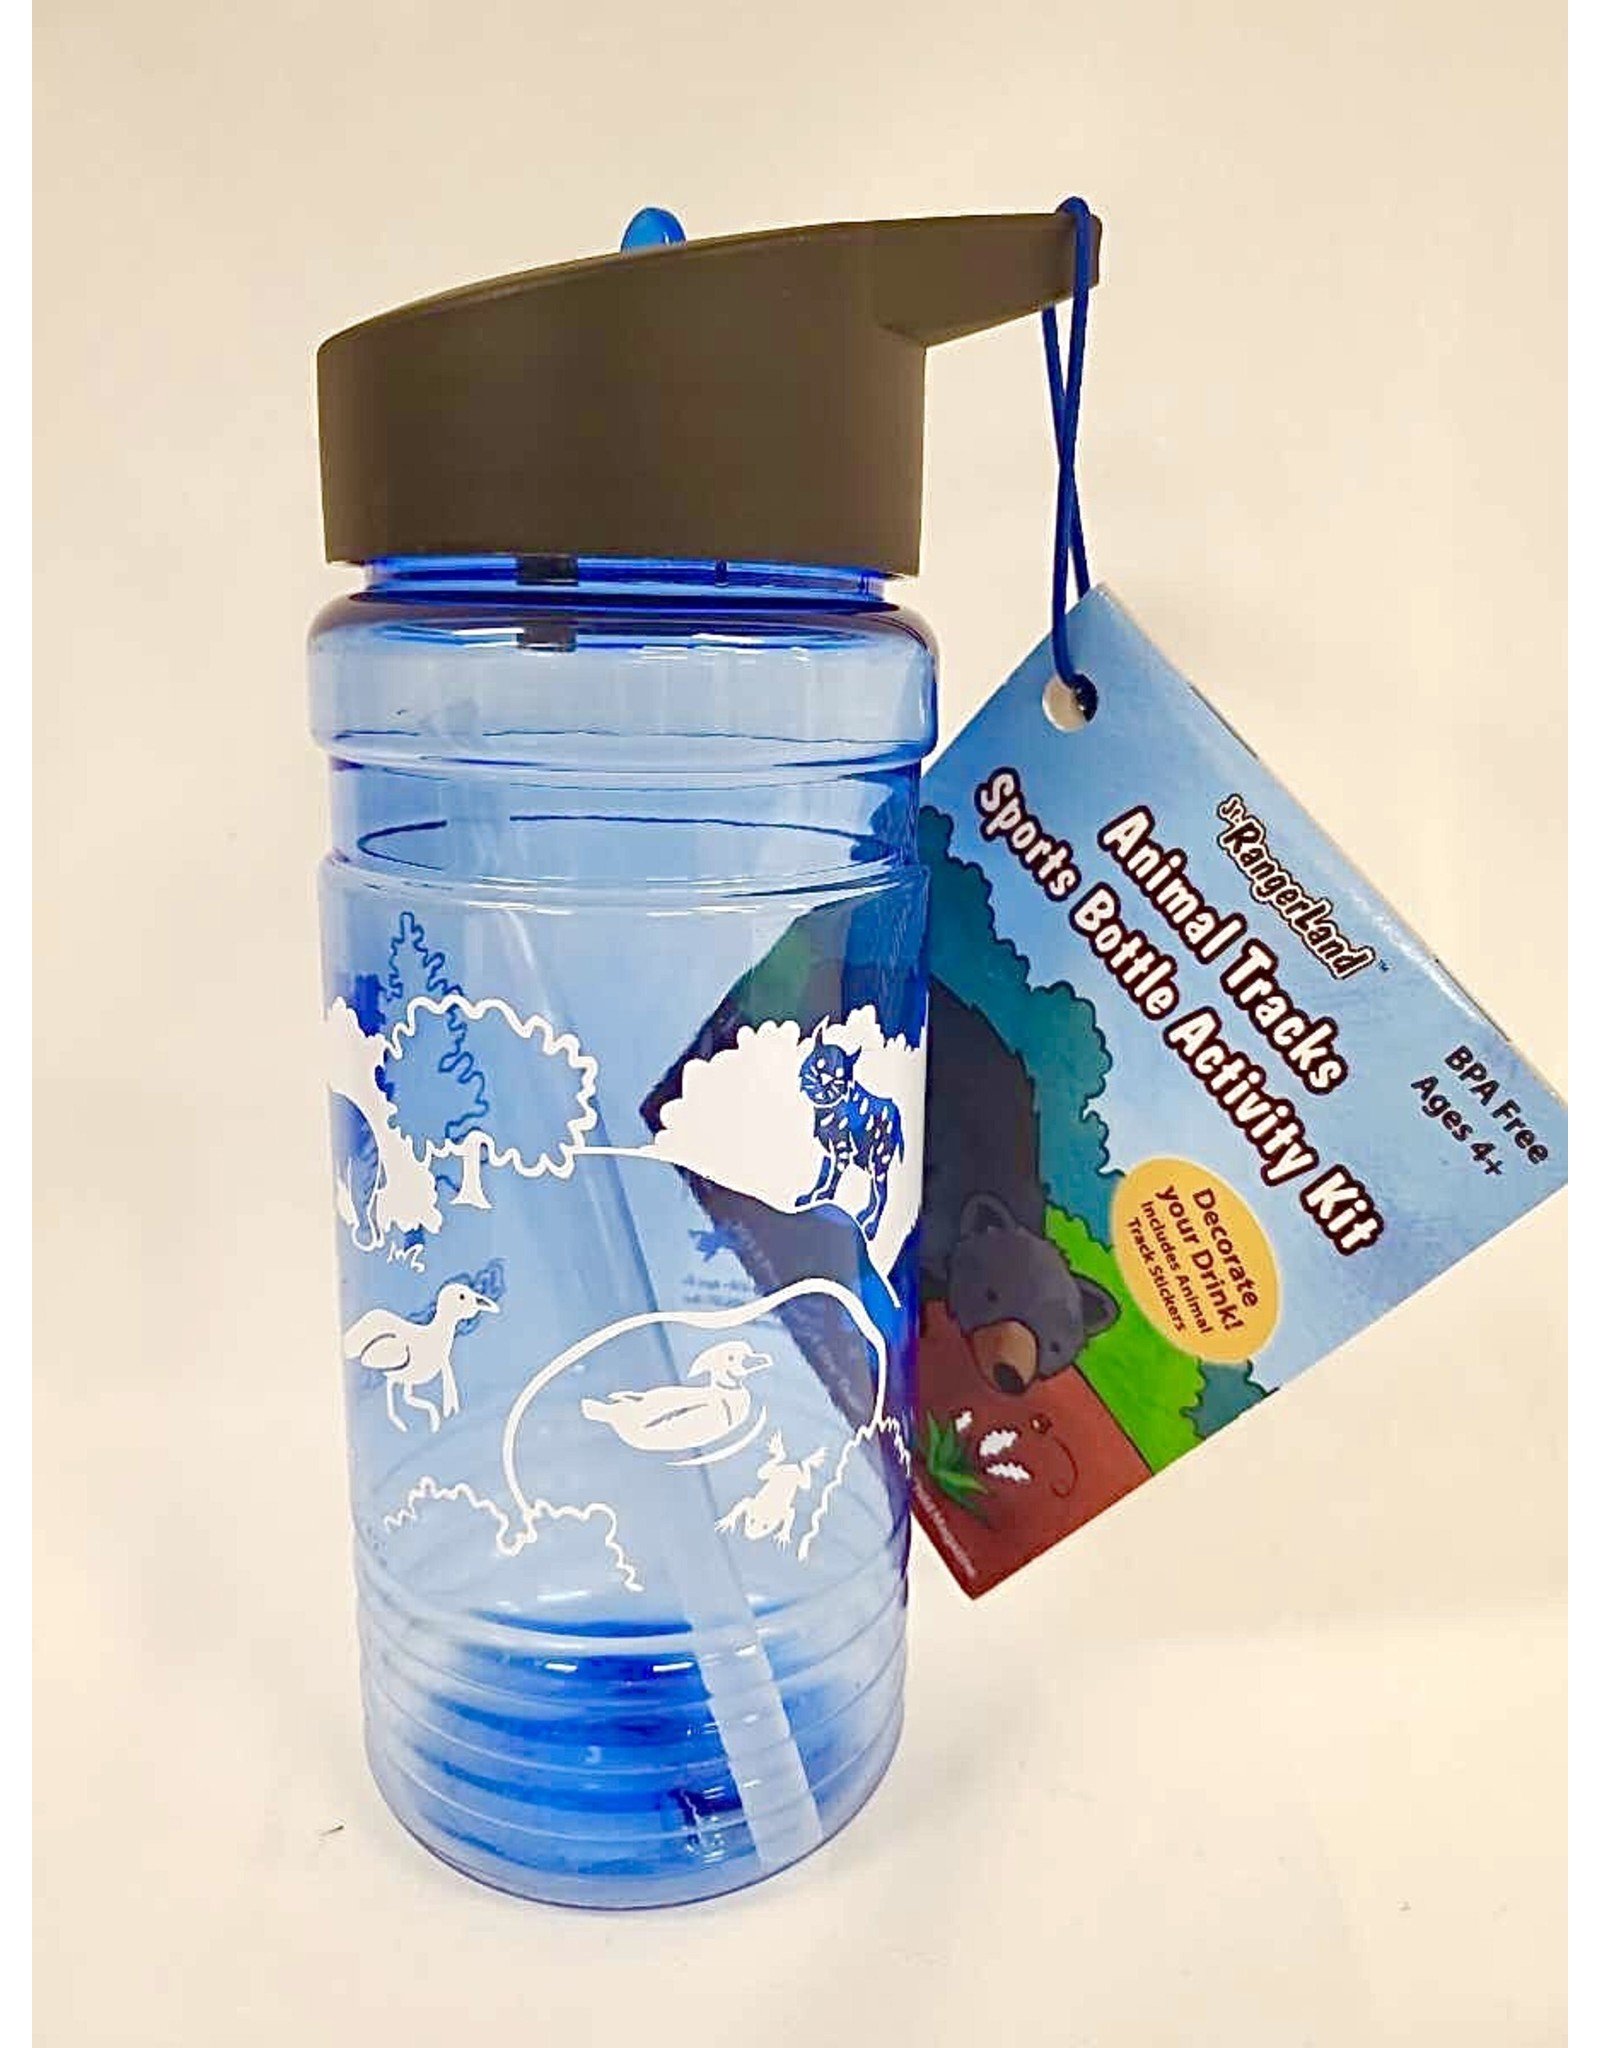 Expedition Bottle and Activity Book